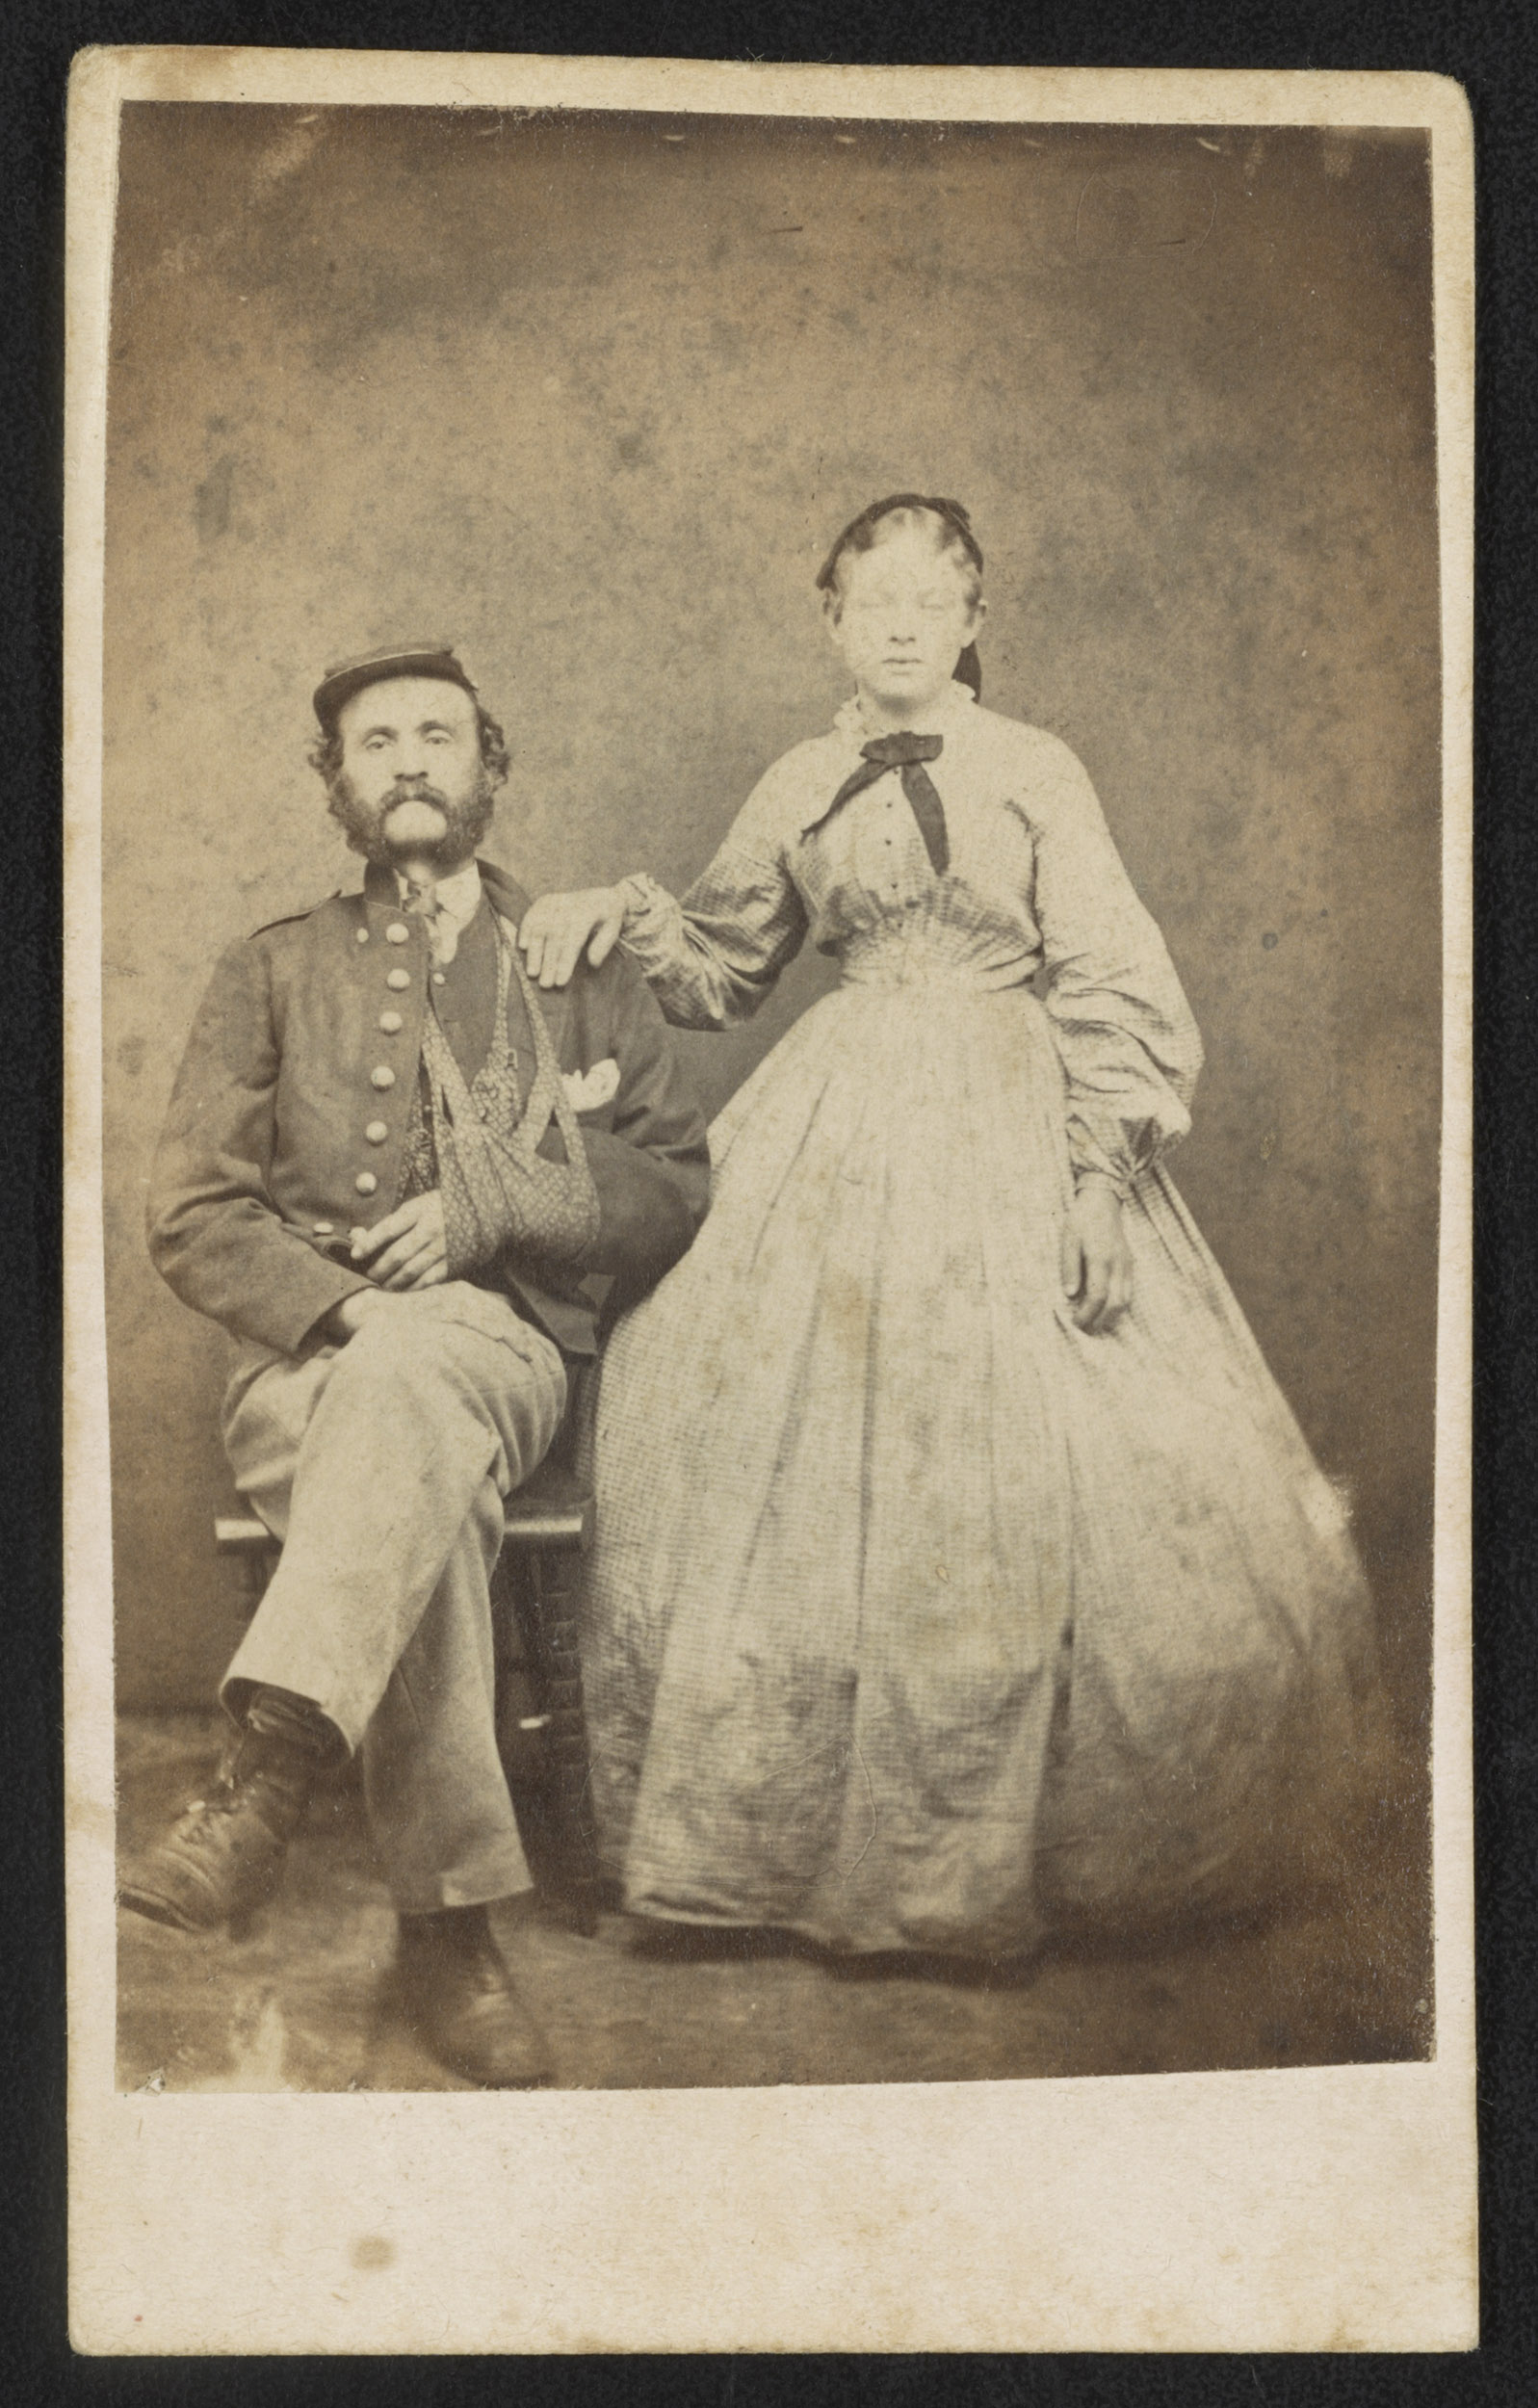 Image of an unidentified Confederate soldier and his wife.